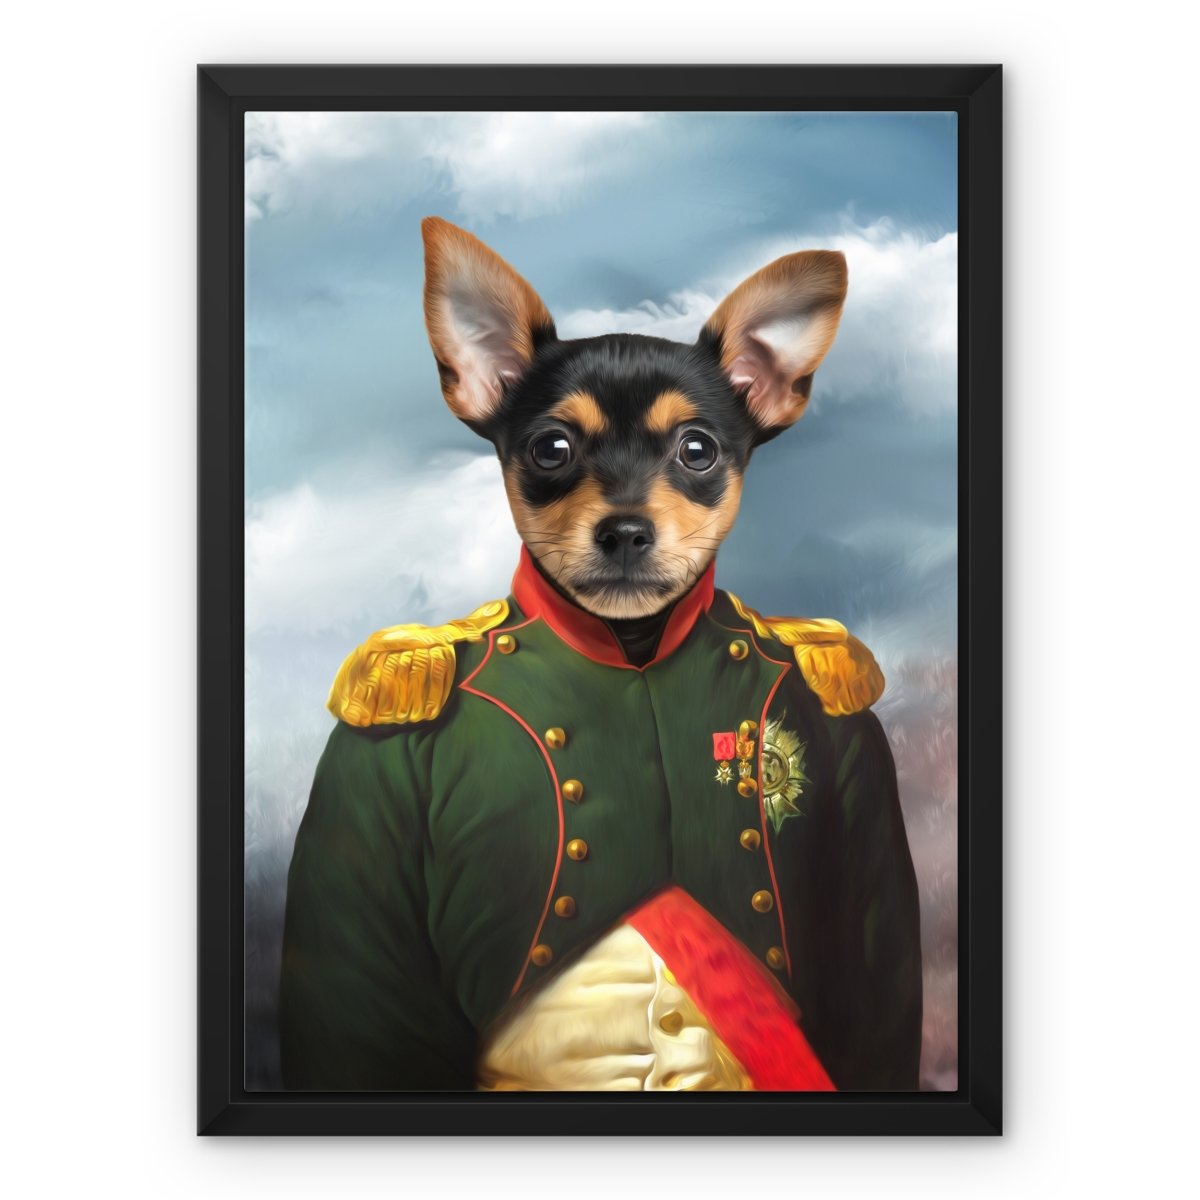 The Dignitary: Custom Pet Canvas - Paw & Glory - #pet portraits# - #dog portraits# - #pet portraits uk#paw and glory, custom pet portrait canvas,custom pet canvas uk, pet canvas portrait, custom dog canvas, personalised cat canvas, canvas dog carrier